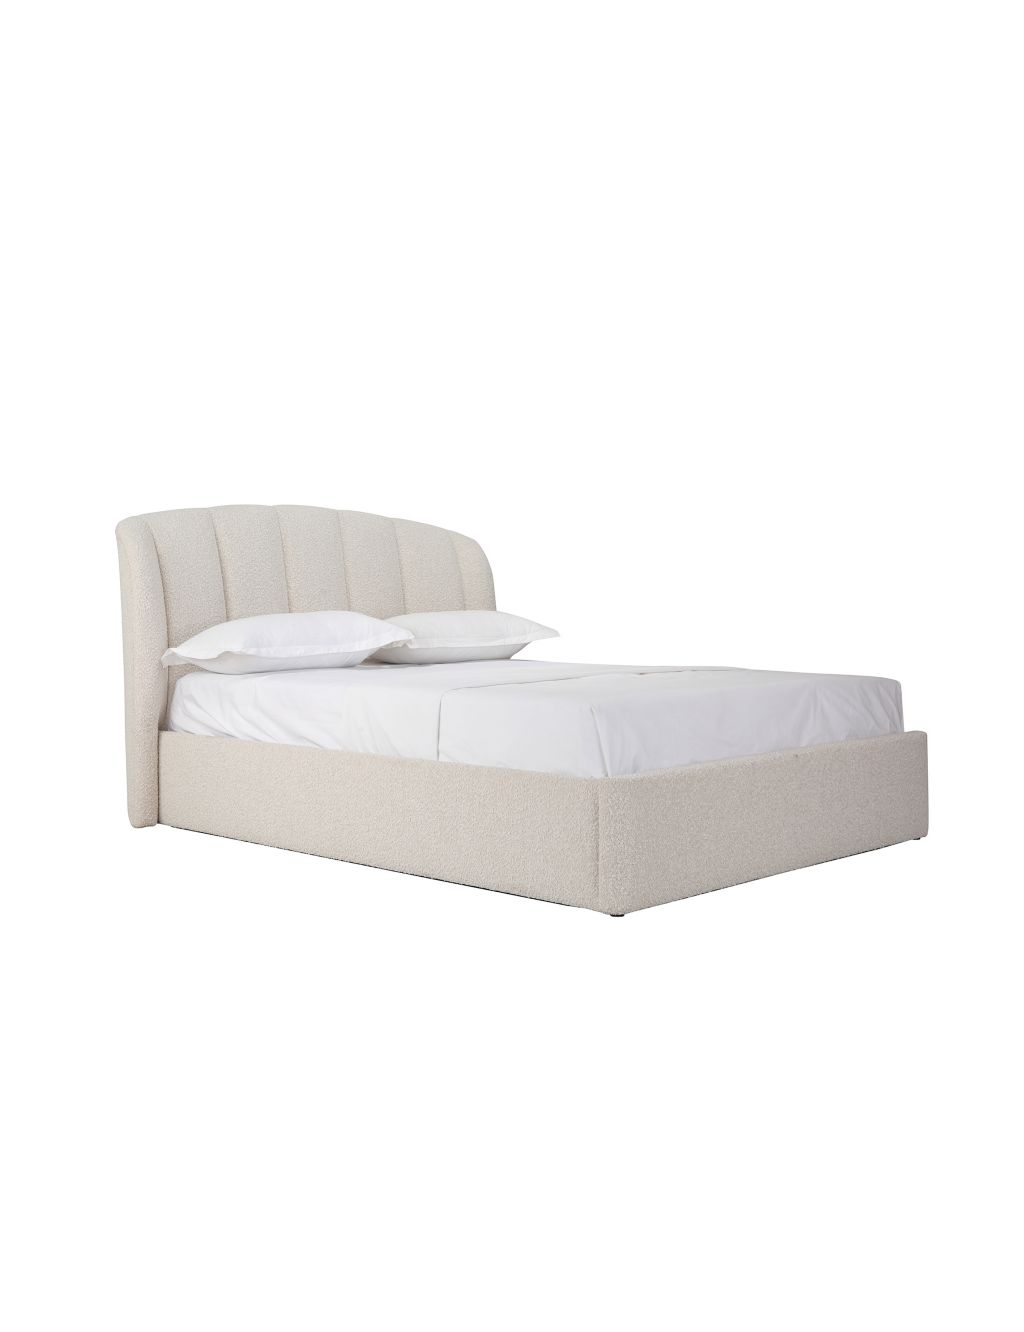 Cassis Upholstered Ottoman Bed